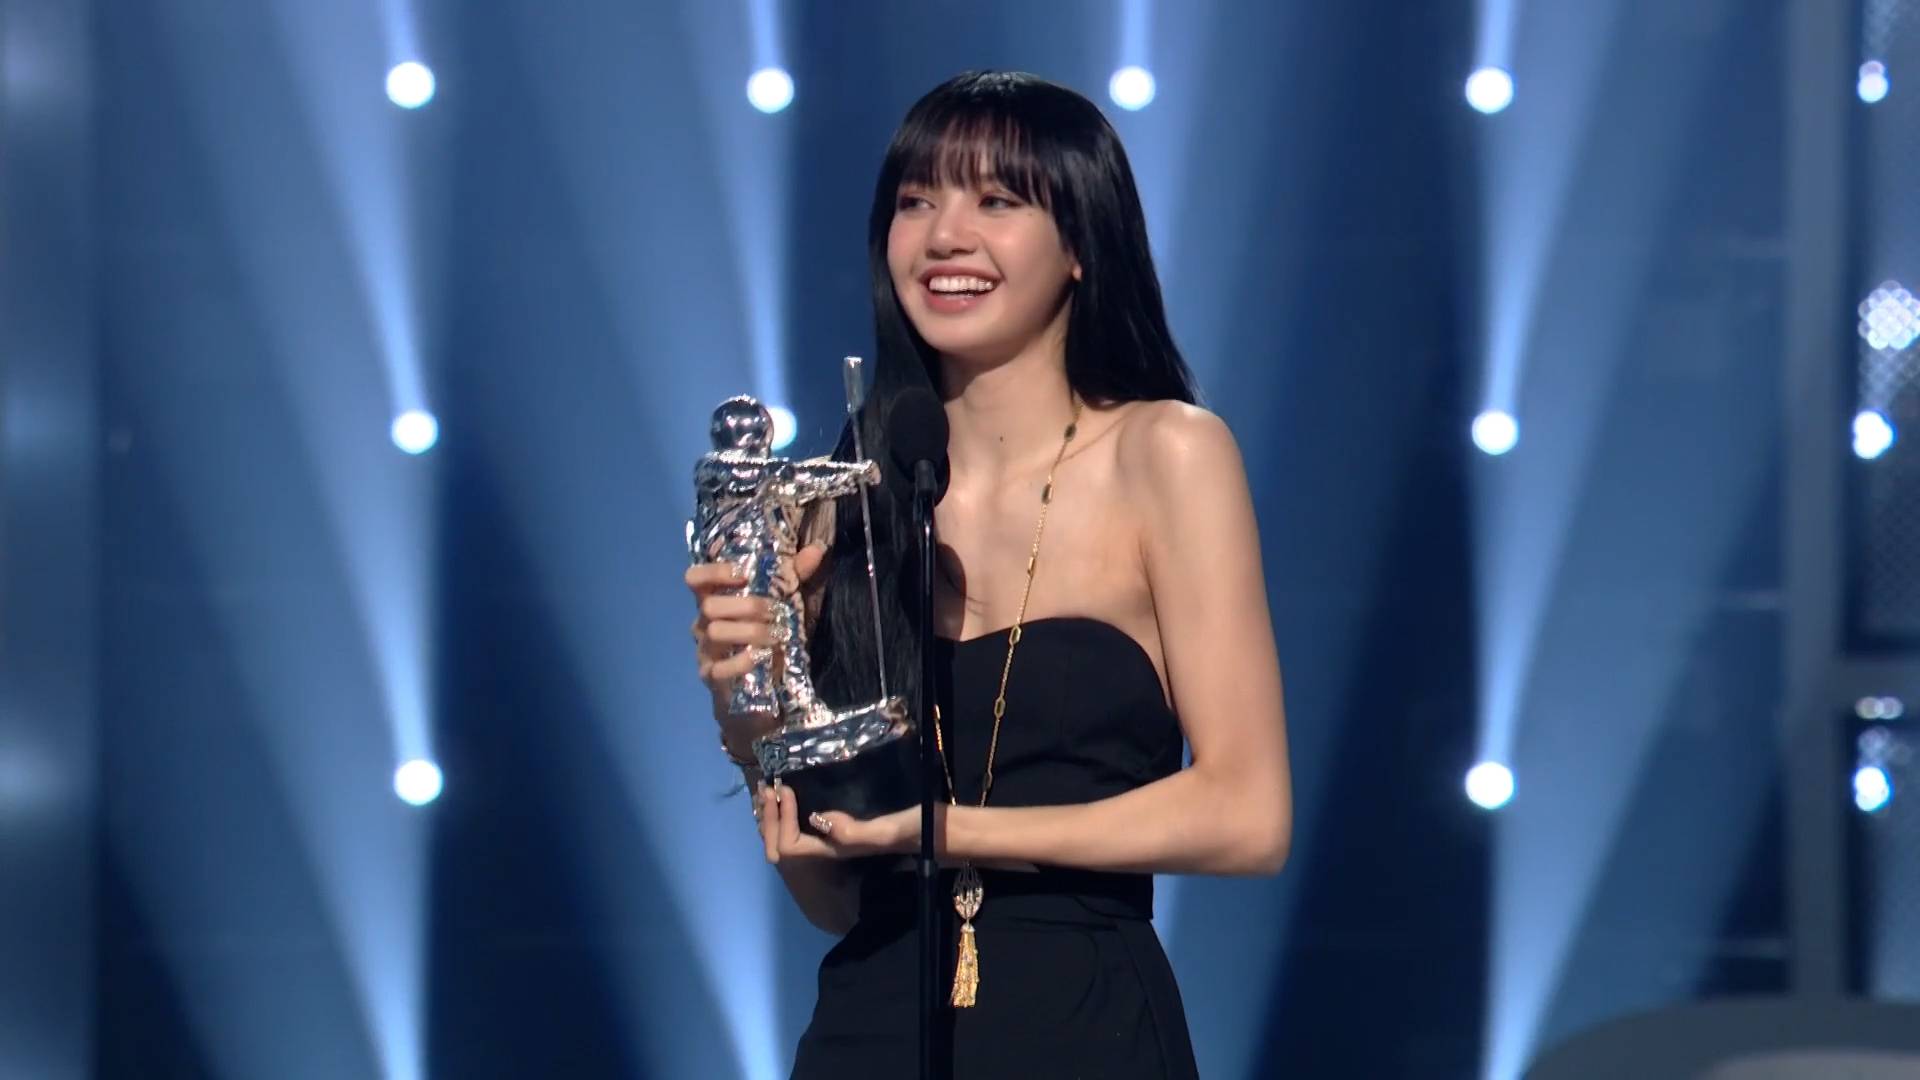 The award for Best K-Pop goes to Thai artist Lisa for her song "Lalisa" at the MTV VMAs 2022.